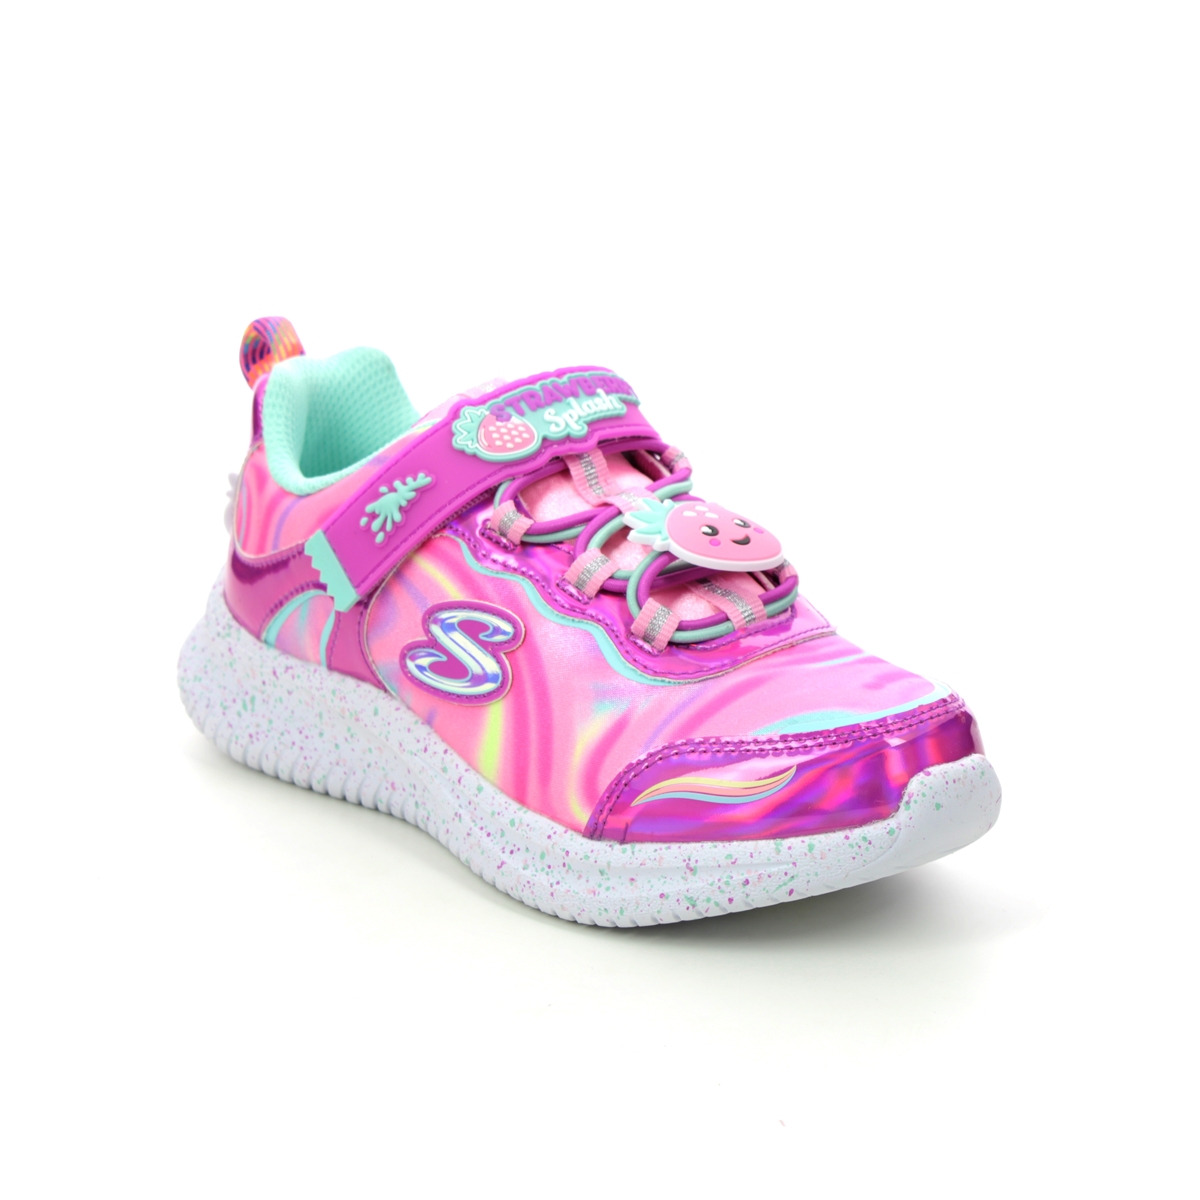 Skechers Jumpsters Sweet Pink Kids Girls Trainers 302215L In Size 27 In Plain Pink For kids